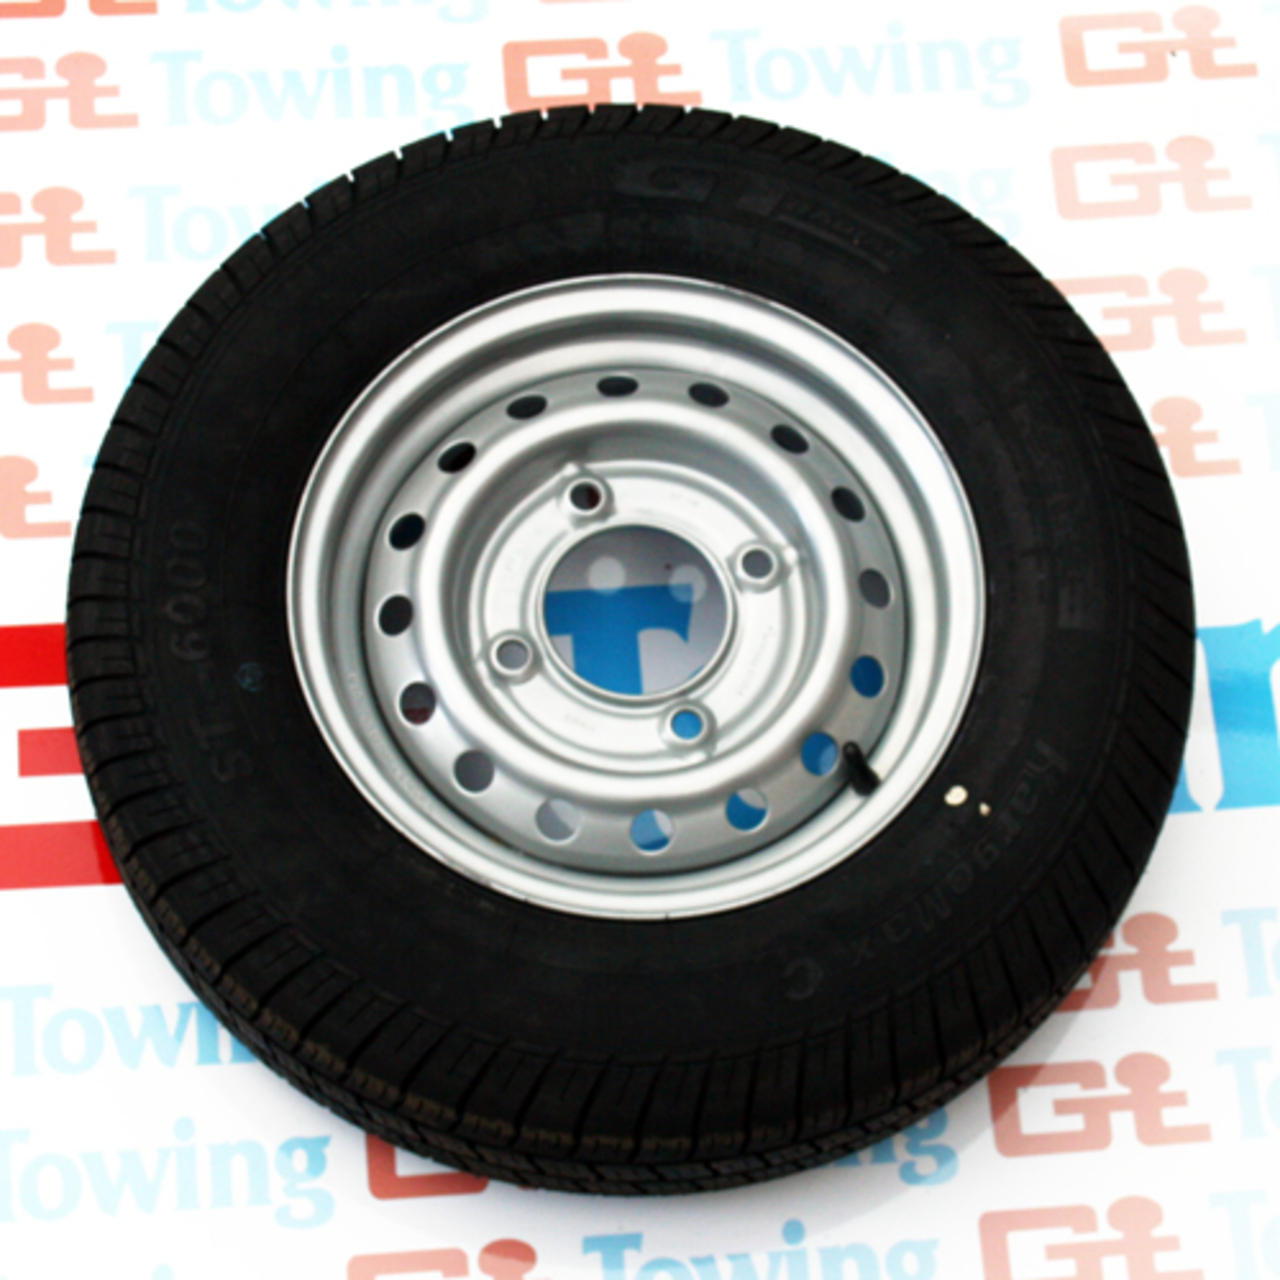 13" Wheel & Tyre for Ifor Williams 2700kg Twin Axle Horse Box Trailers 165 R13 